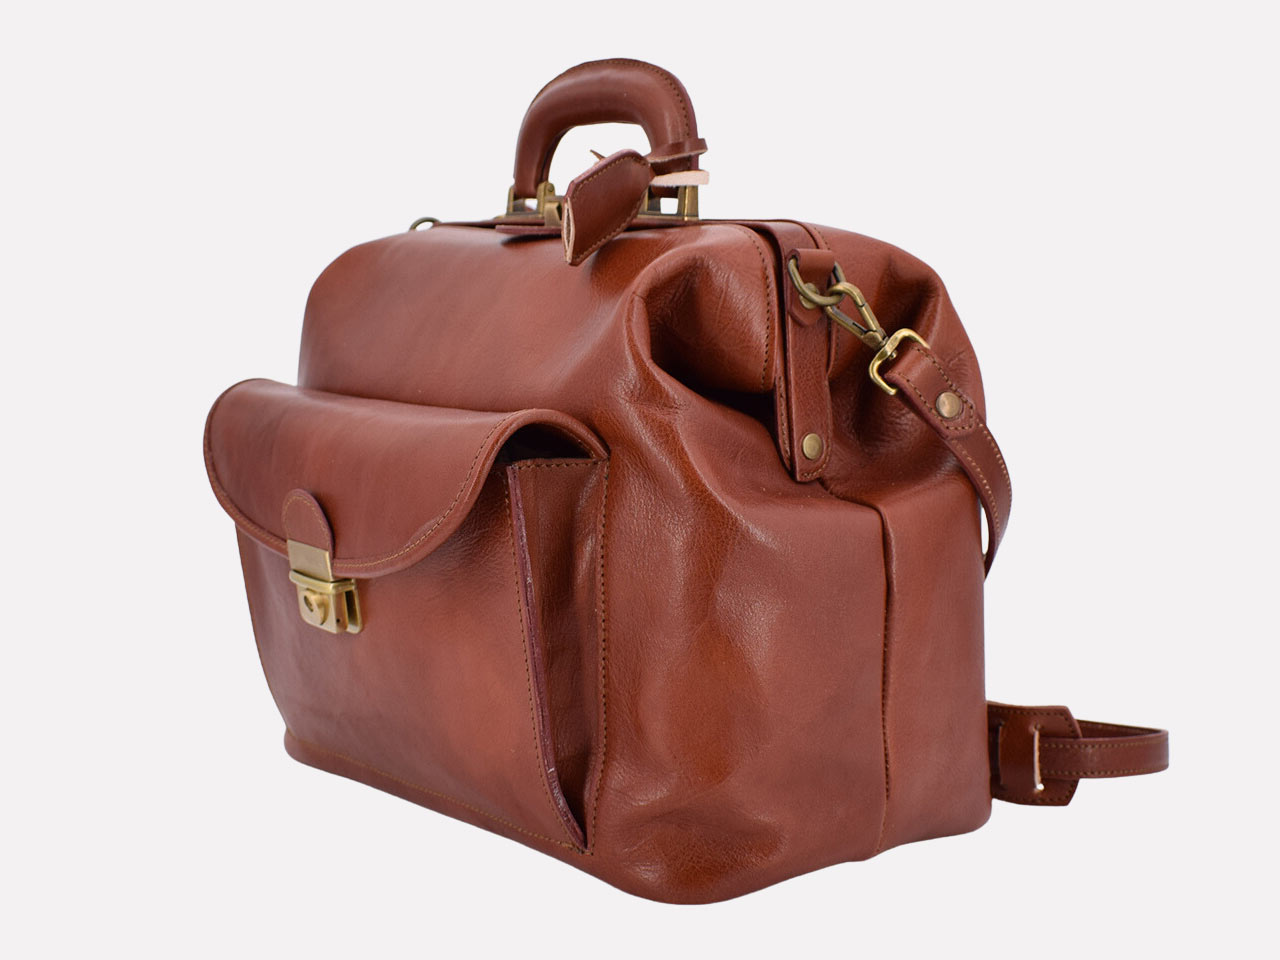 Salus, Italian leather doctor bag designed and handcrafted in Rome by Riccardo Mancini